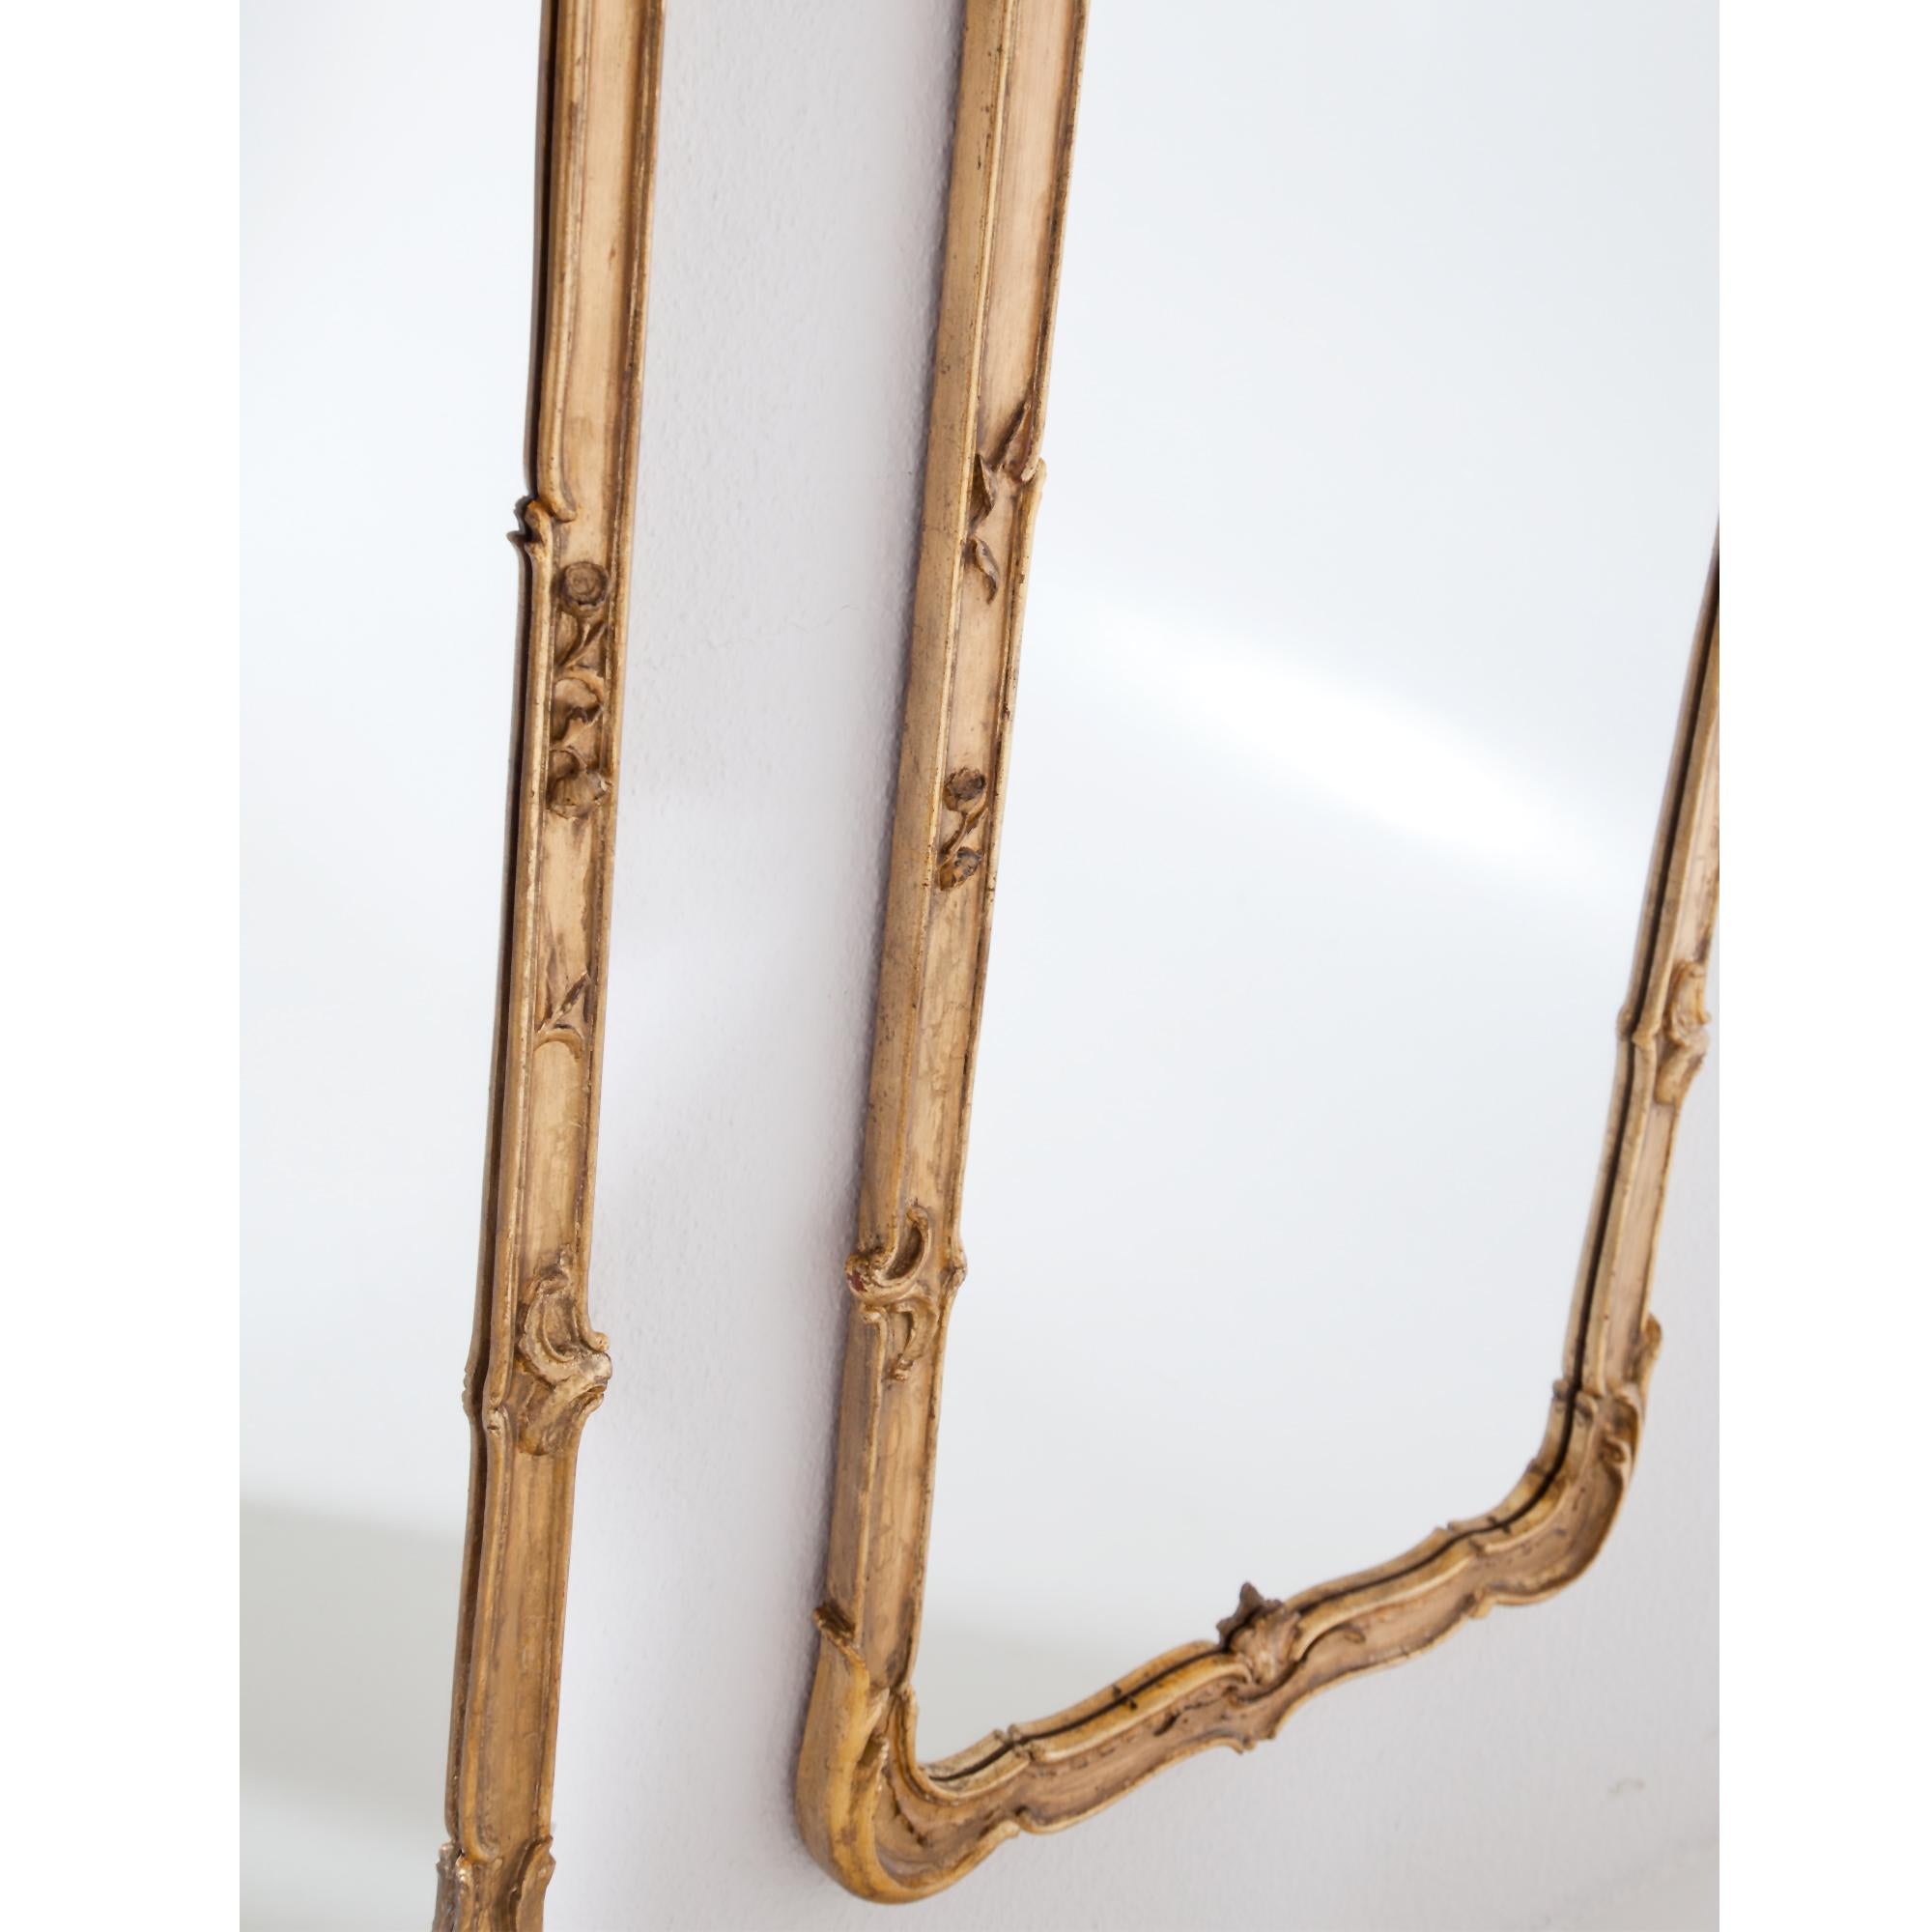 Patinated Pair of Gilt Rococo-Style Wall Mirrors, 19th-20th Century